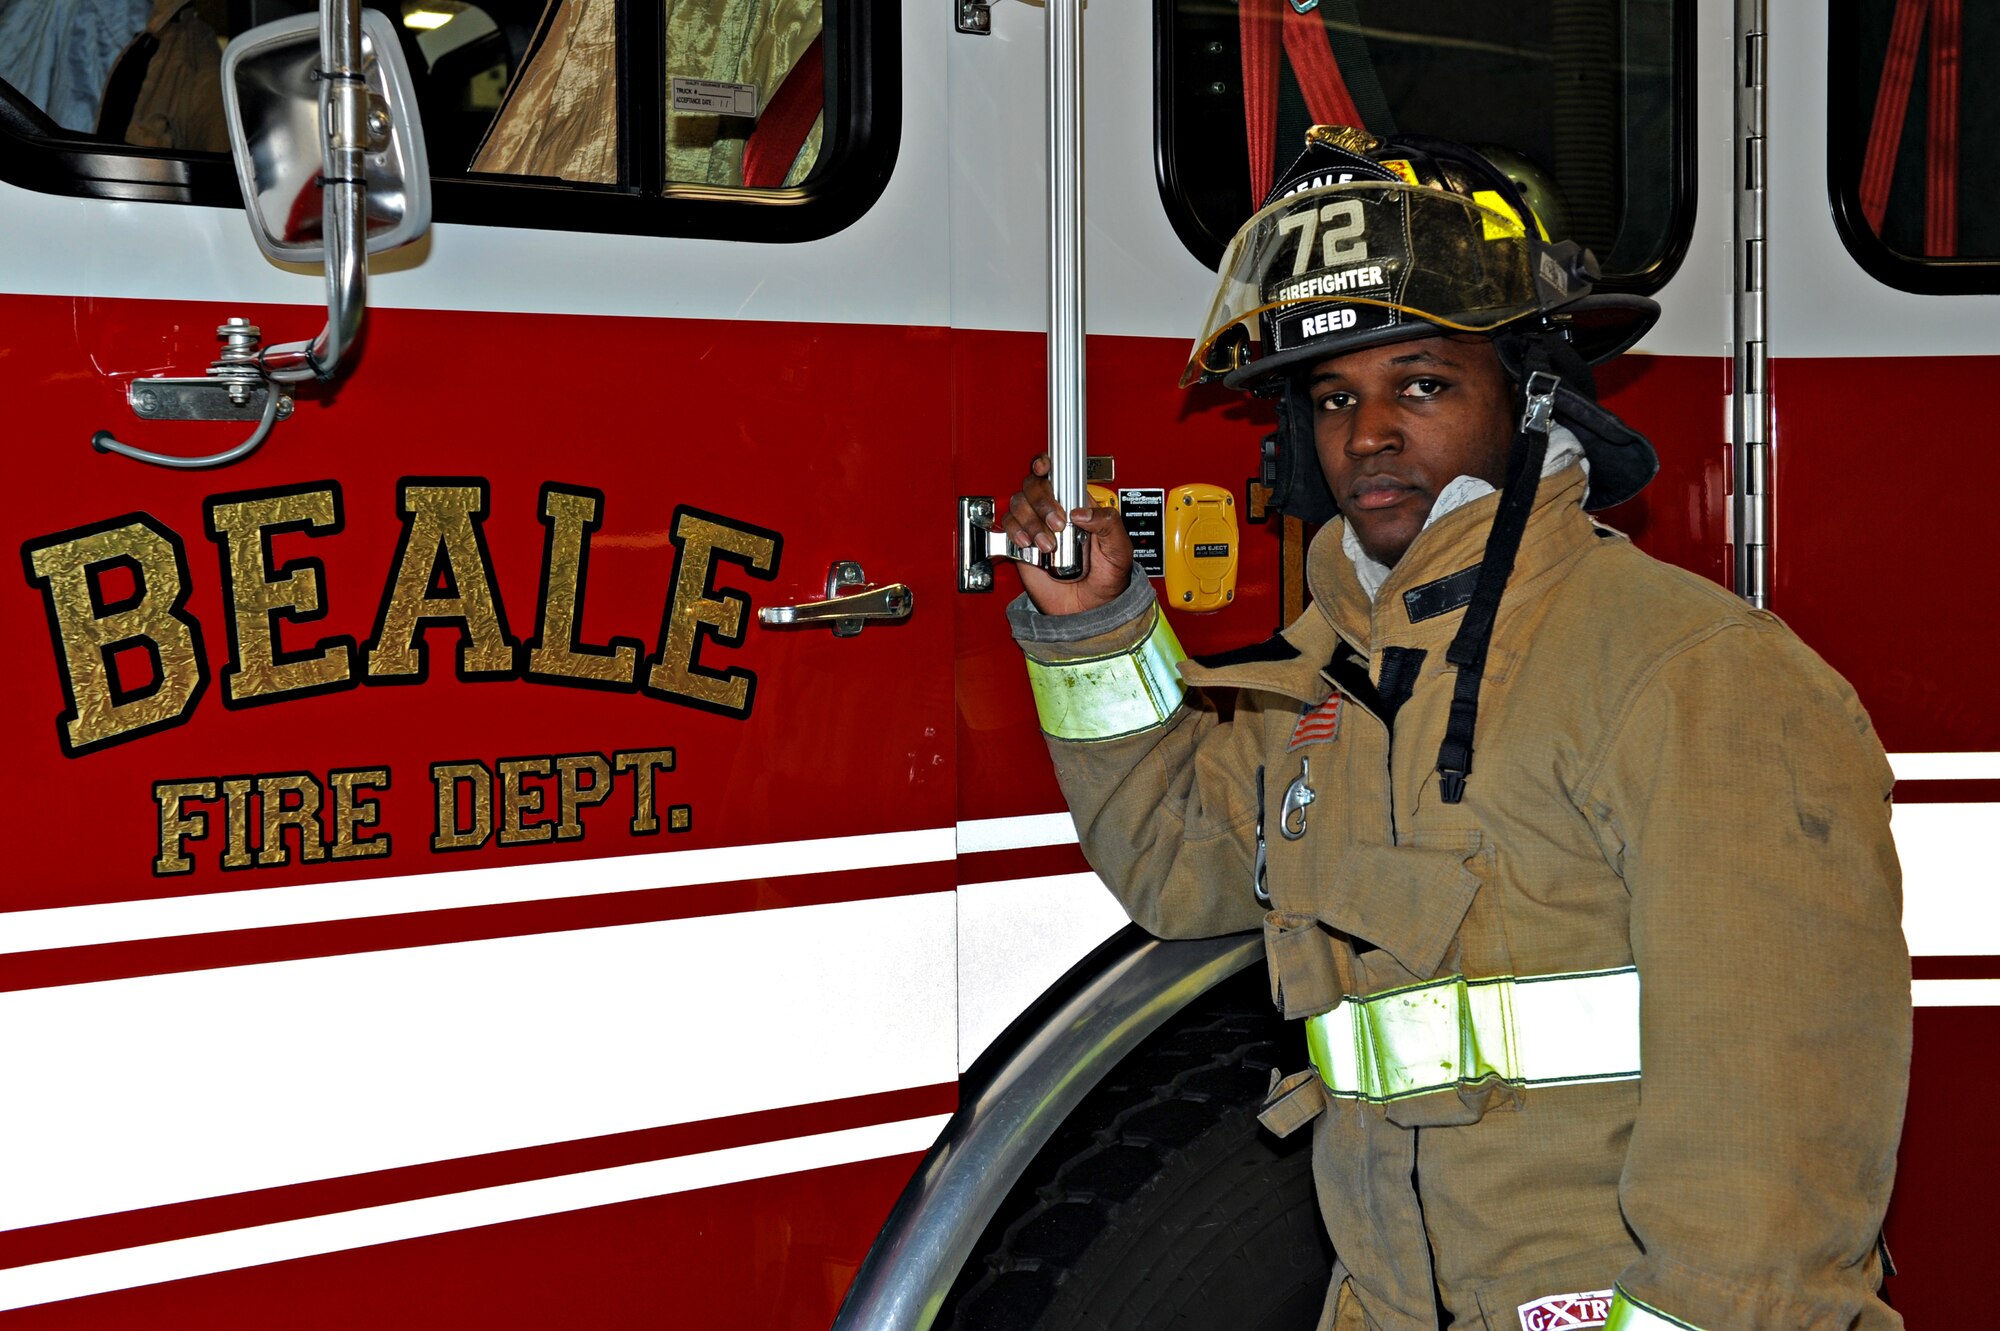 Airman 1st Class Michael Reed, 9th Civil Engineer Squadron firefighter, poses in front of a fire engine at Beale Air Force Base, Calif., Jan. 8, 2014.  (U.S. Air Force photo by Airman 1st Class Ramon A. Adelan/Released)